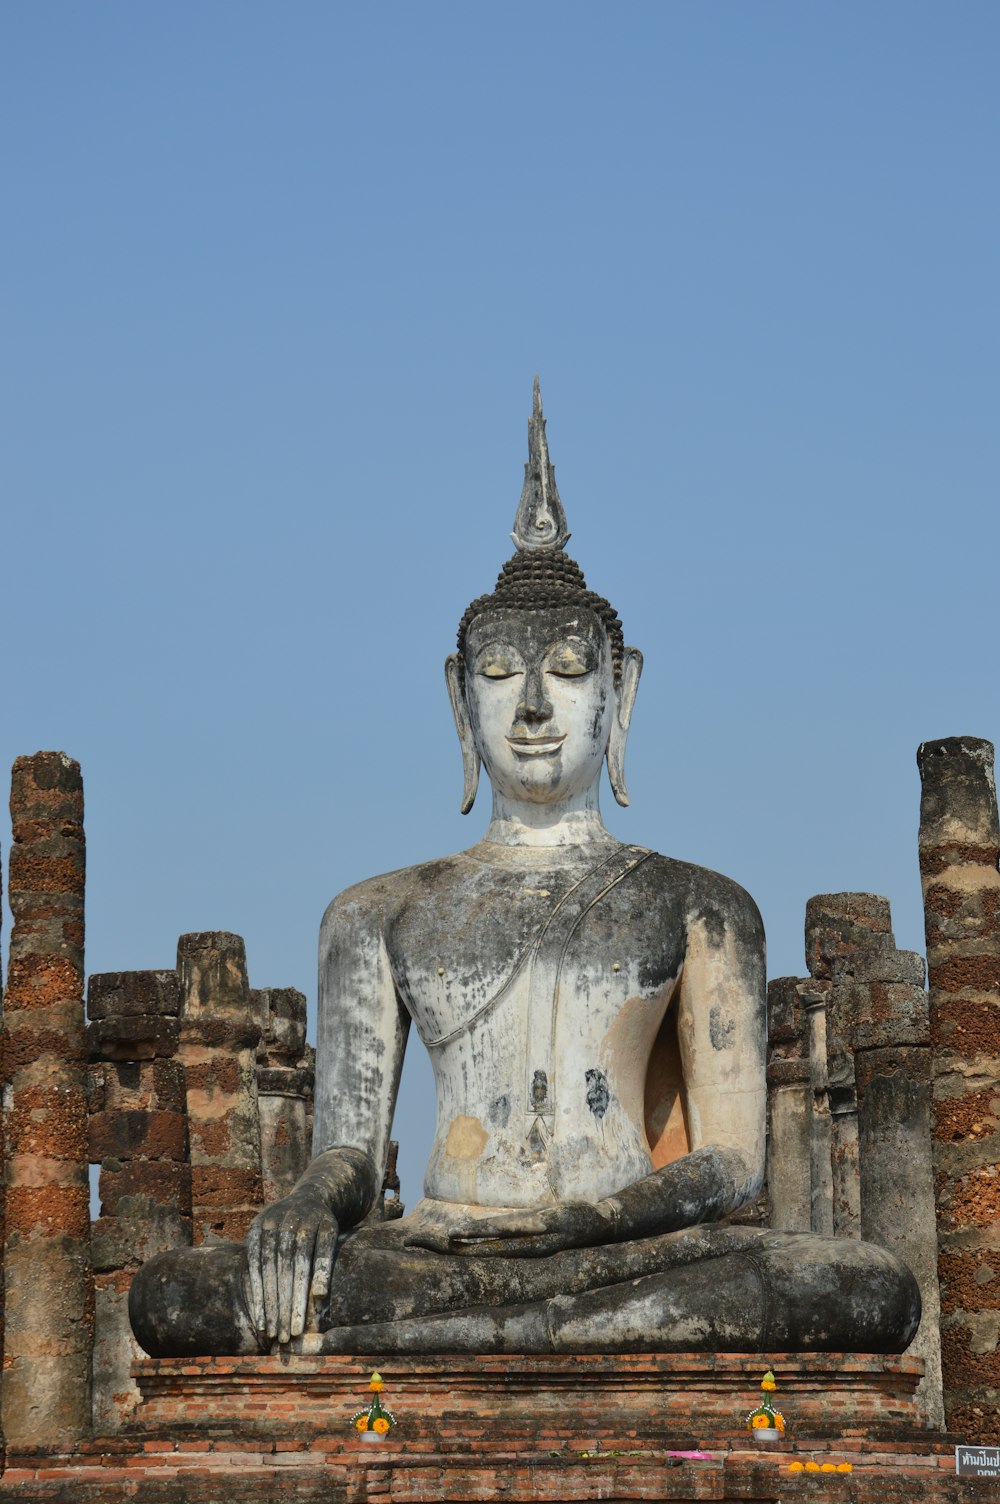 a statue of a buddha sitting on top of a brick wall